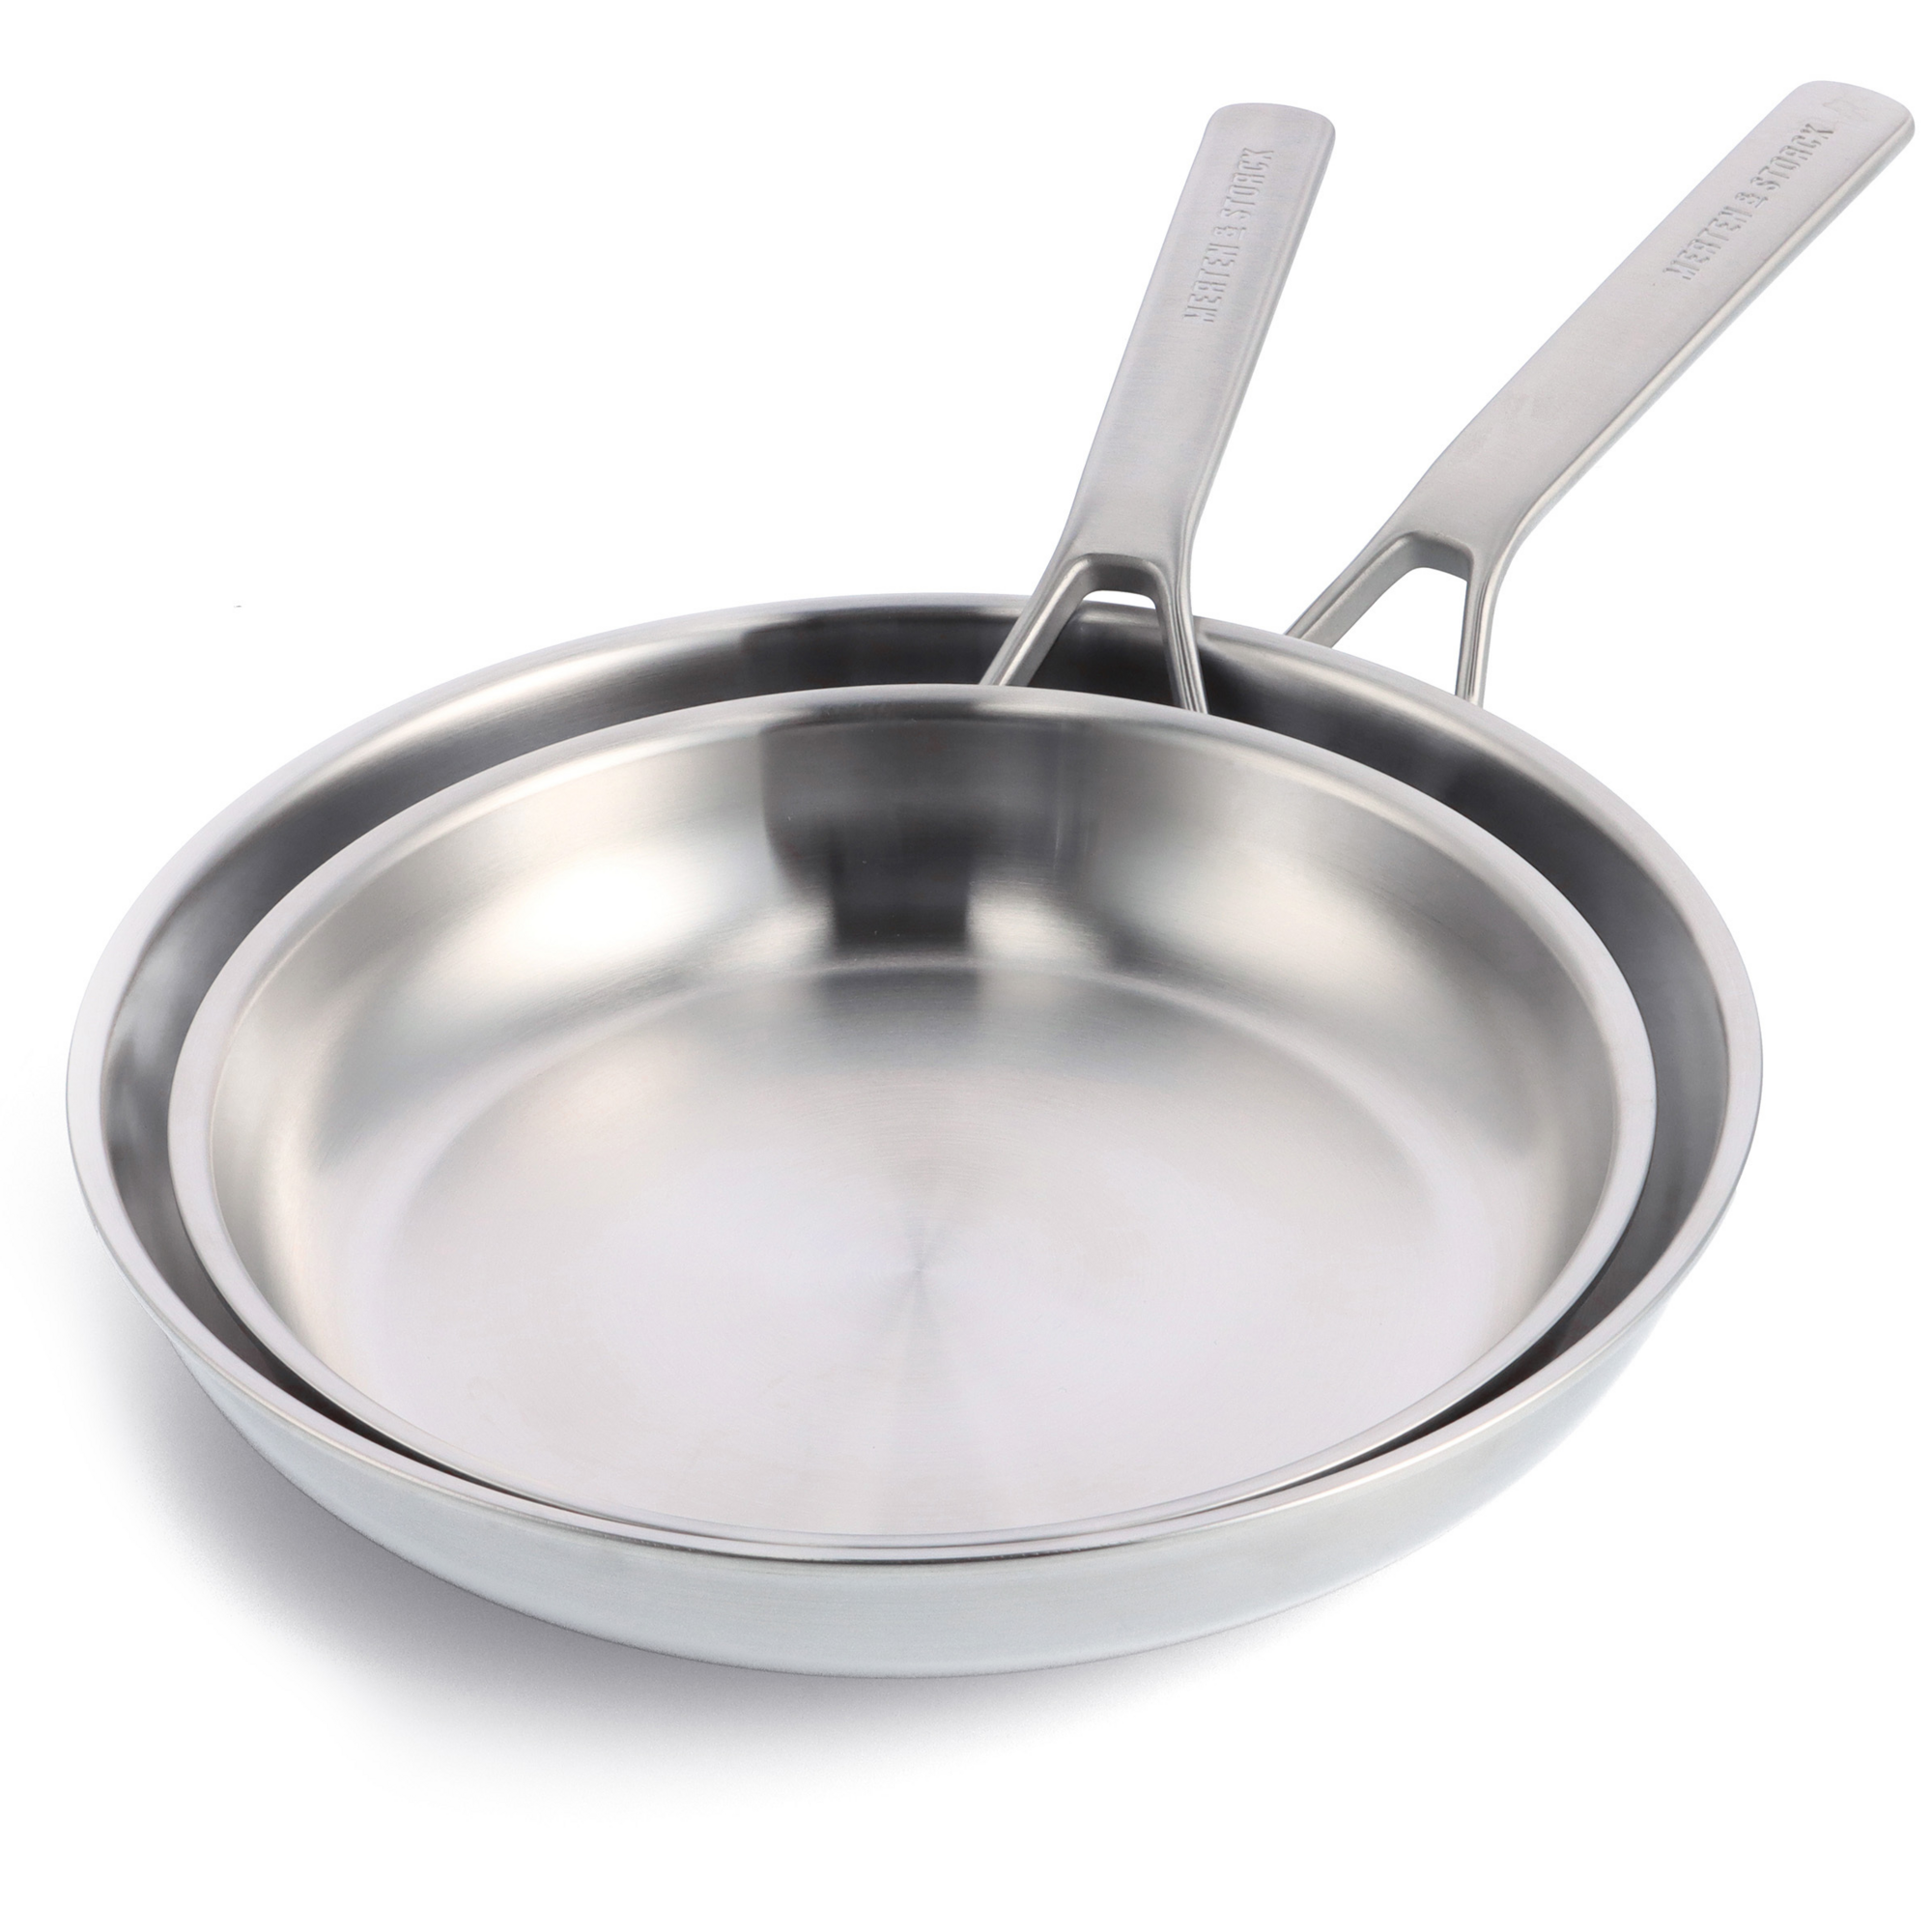 Dash of That Stainless Steel Frypan, 1 ct - Kroger